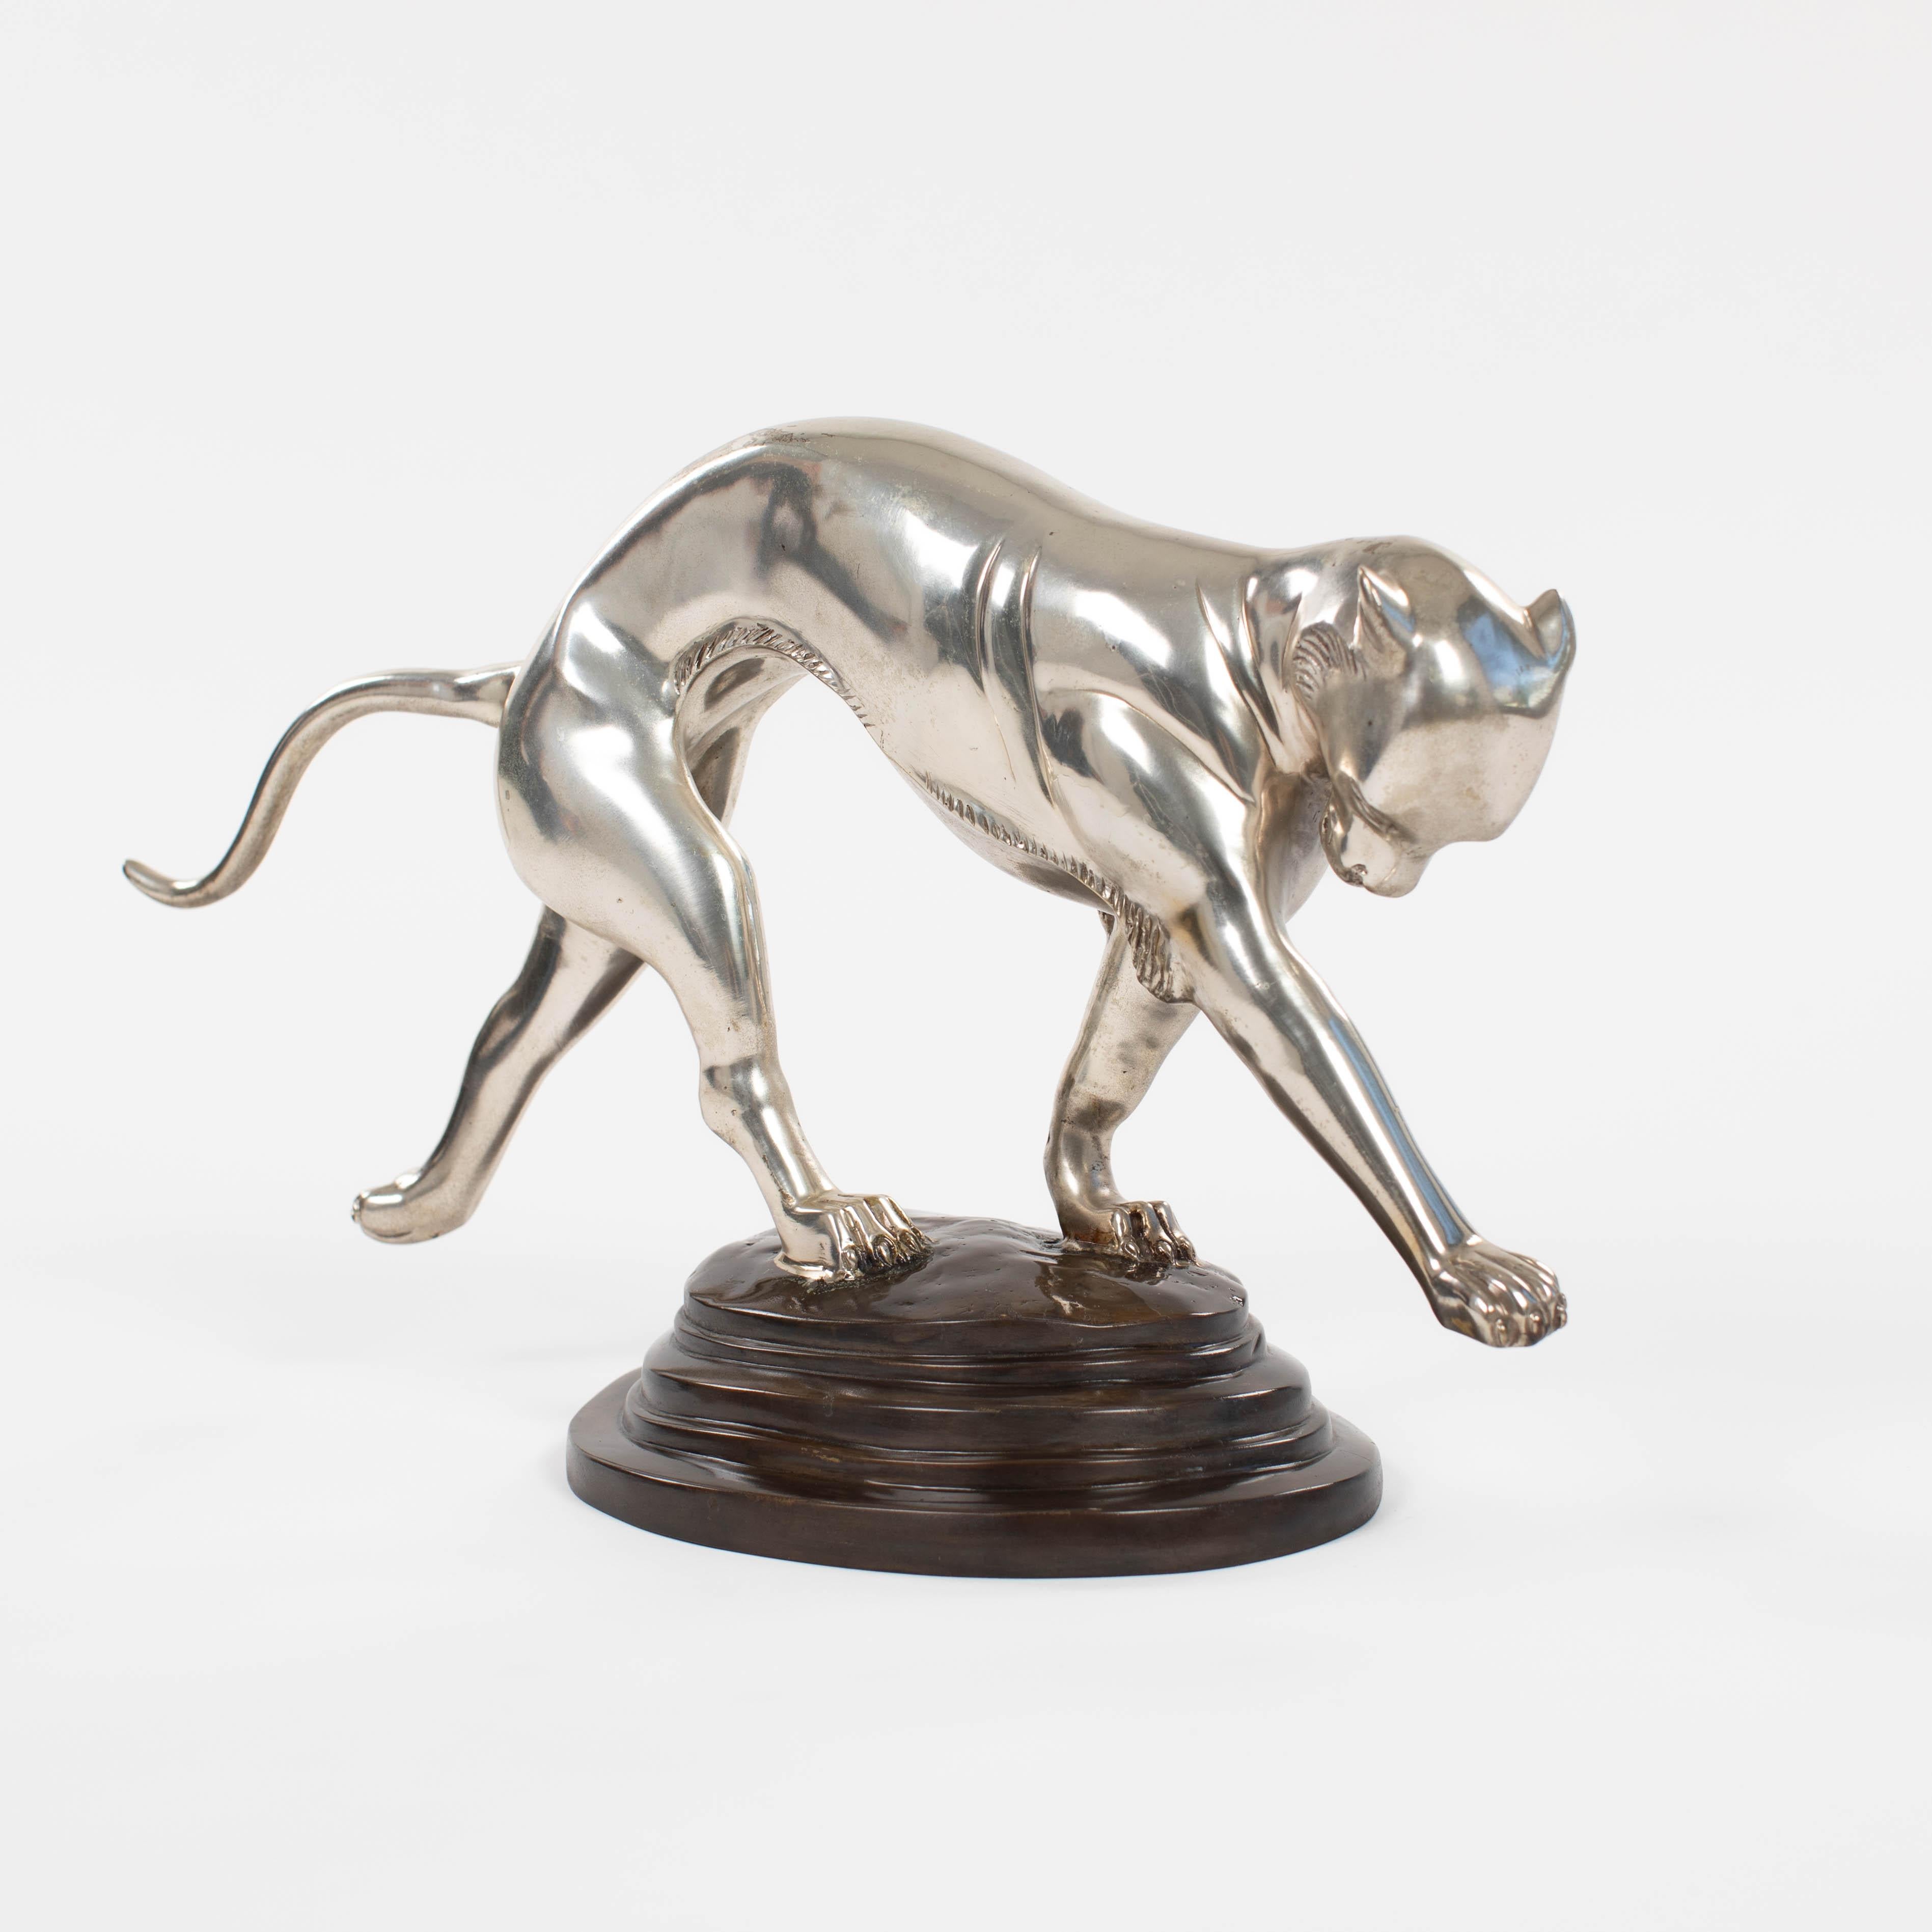 French Art Déco Panther Sculpture in Dynamic Movement Cast Bronze Silvered 1920s

Fantastic Art Deco panther sculpture in a very elegant movement.
The base is oval and stepped and 2 paws of the animal are on the base, the other two legs are in the